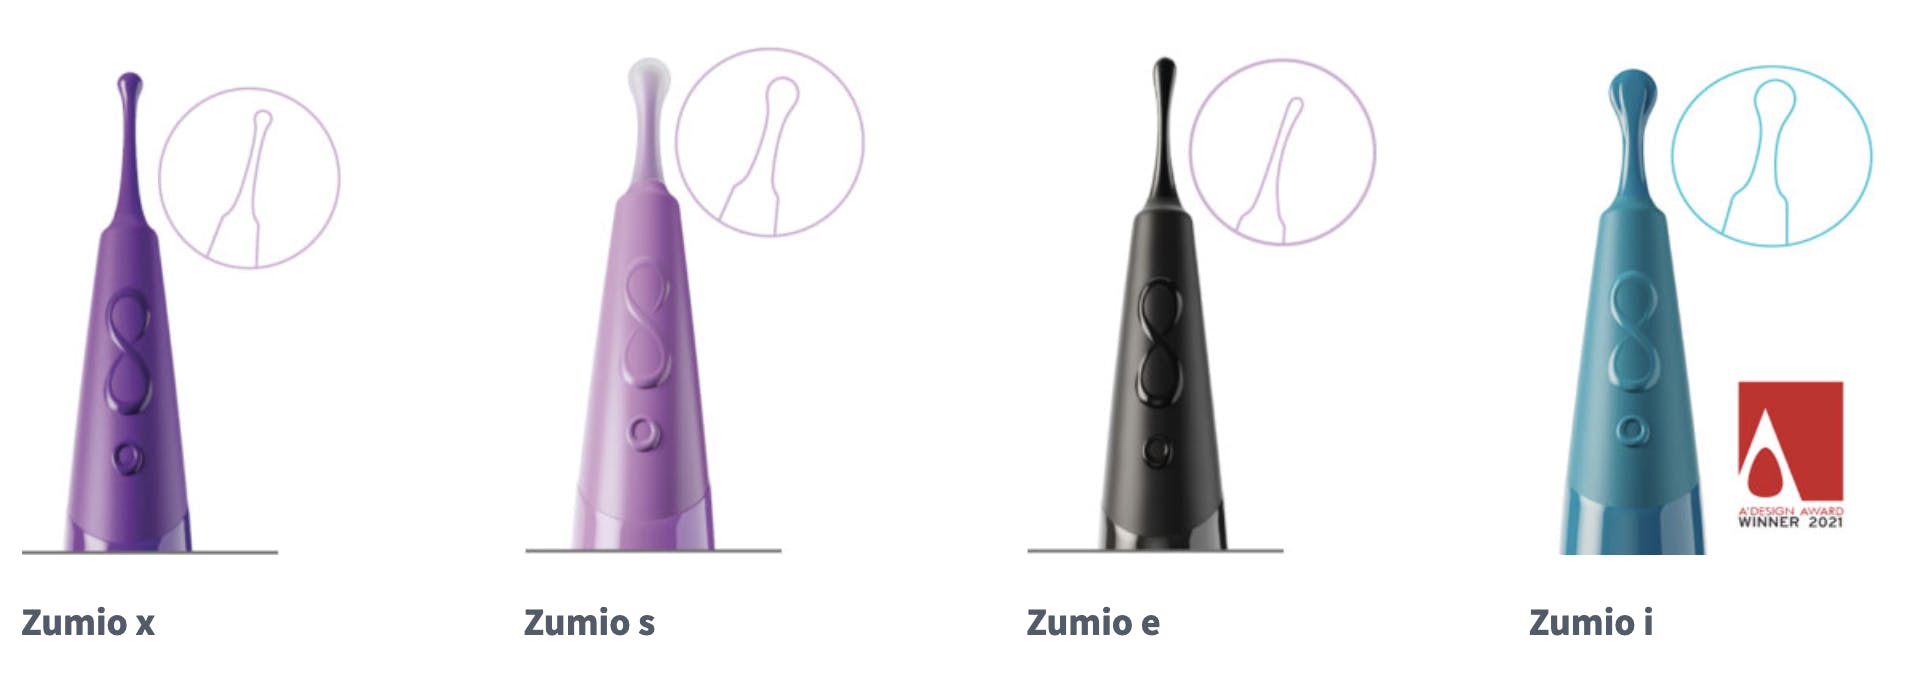 Zumio's line of clitoral stimulators is available in four slightly different versions and colors.